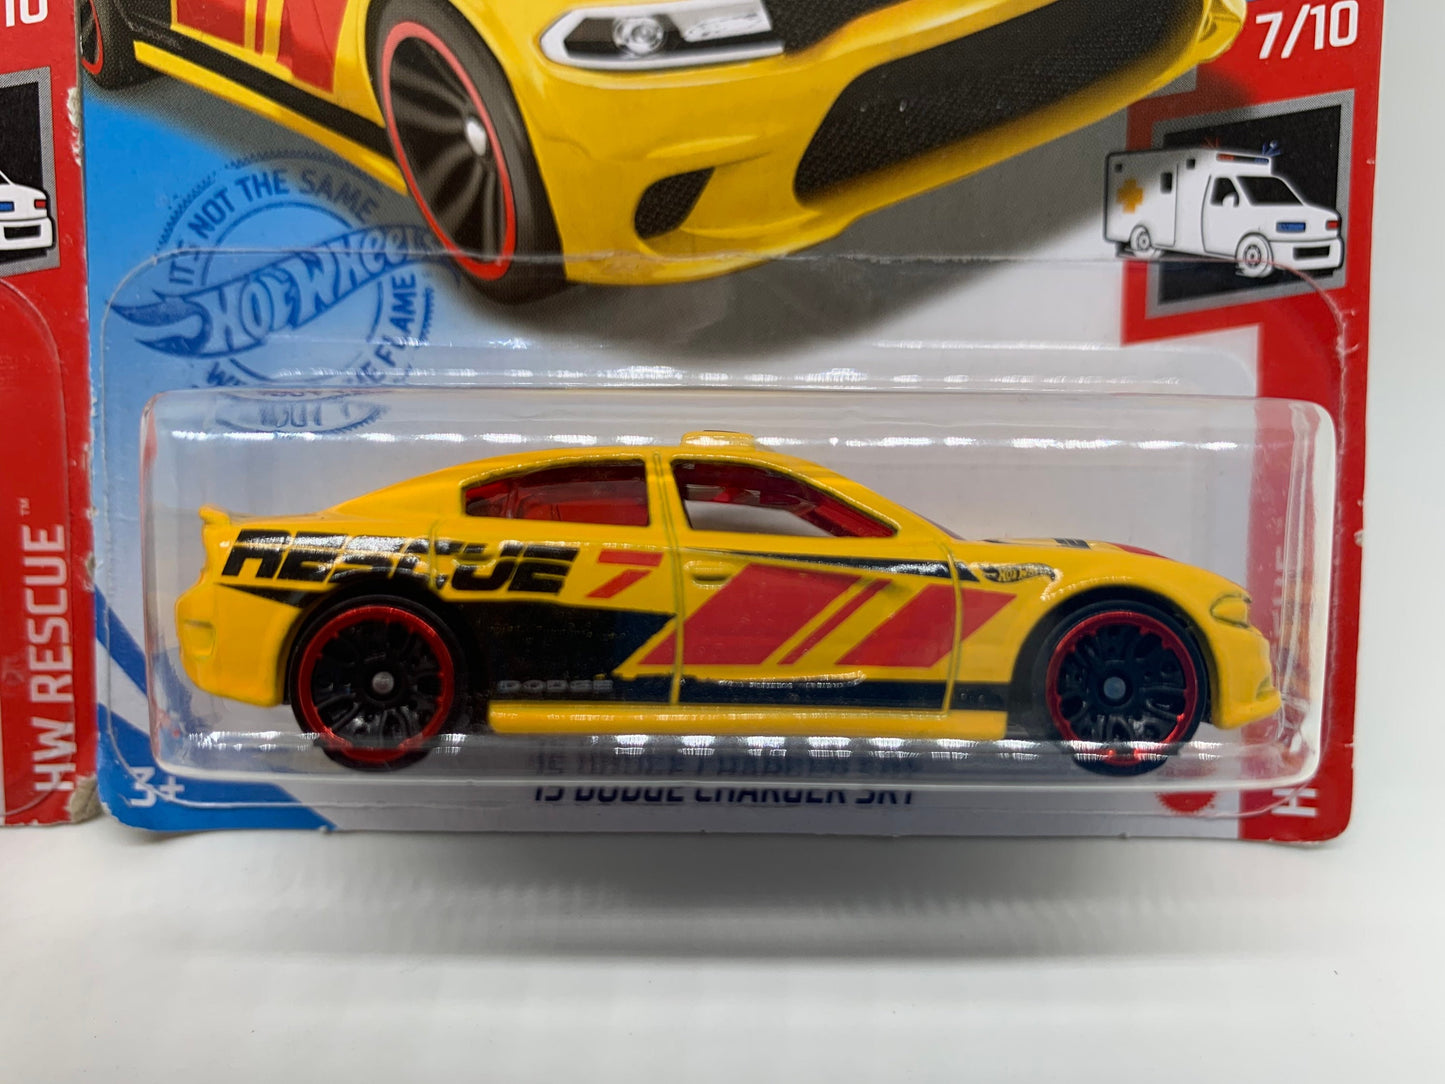 Hot Wheels Dodge Charger SRT Drift Fire Dept Black and Yellow HW Rescue Collectable Miniature Scale Model Toy Car Perfect Birthday Gift